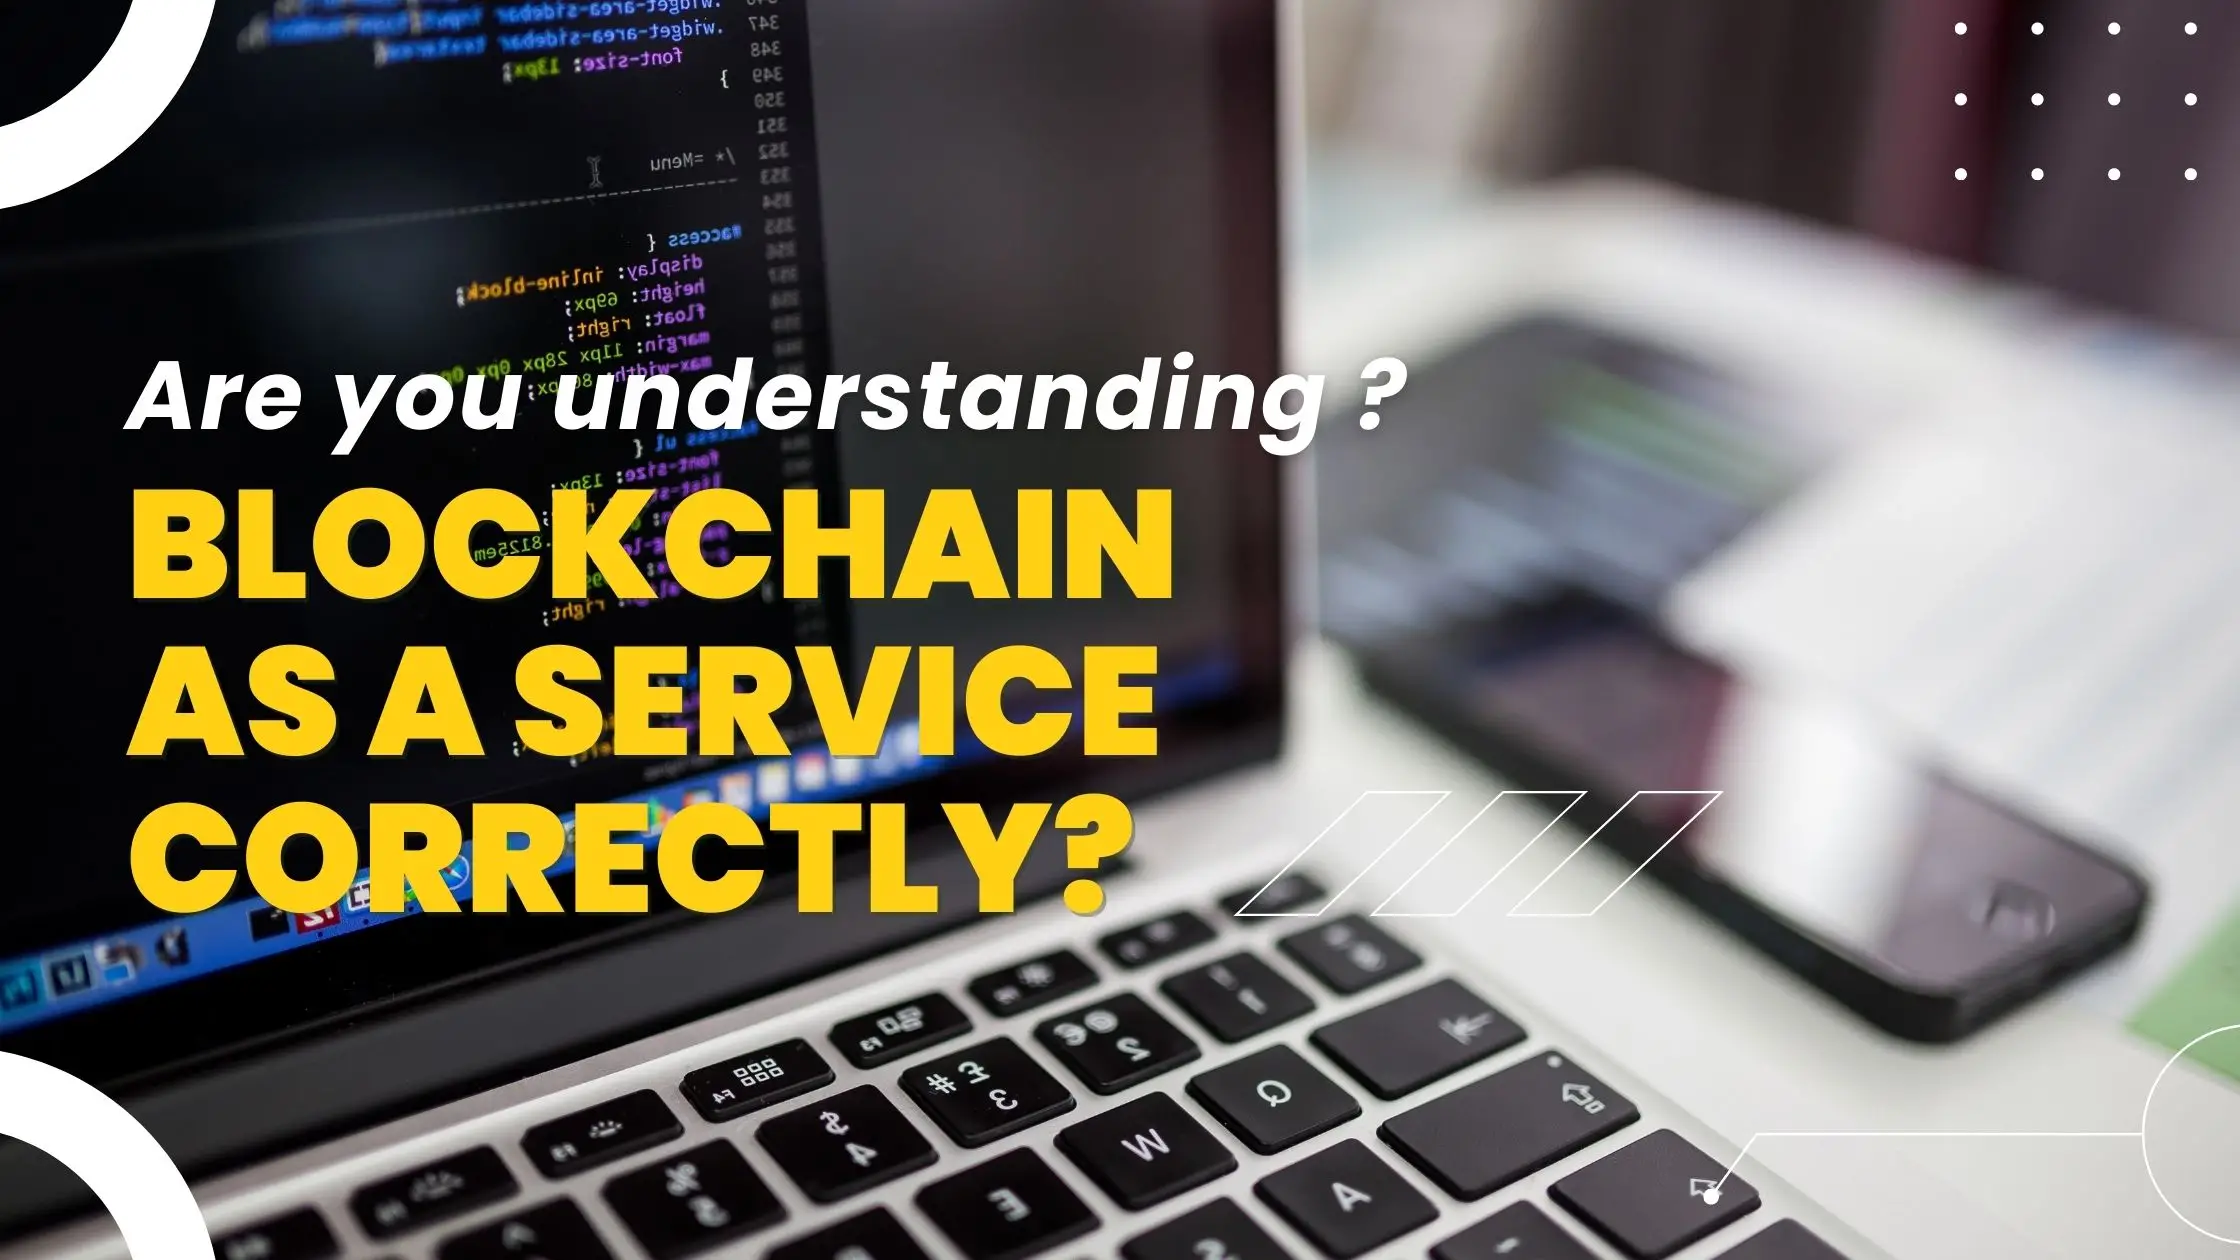 Are you understanding blockchain as a service correctly